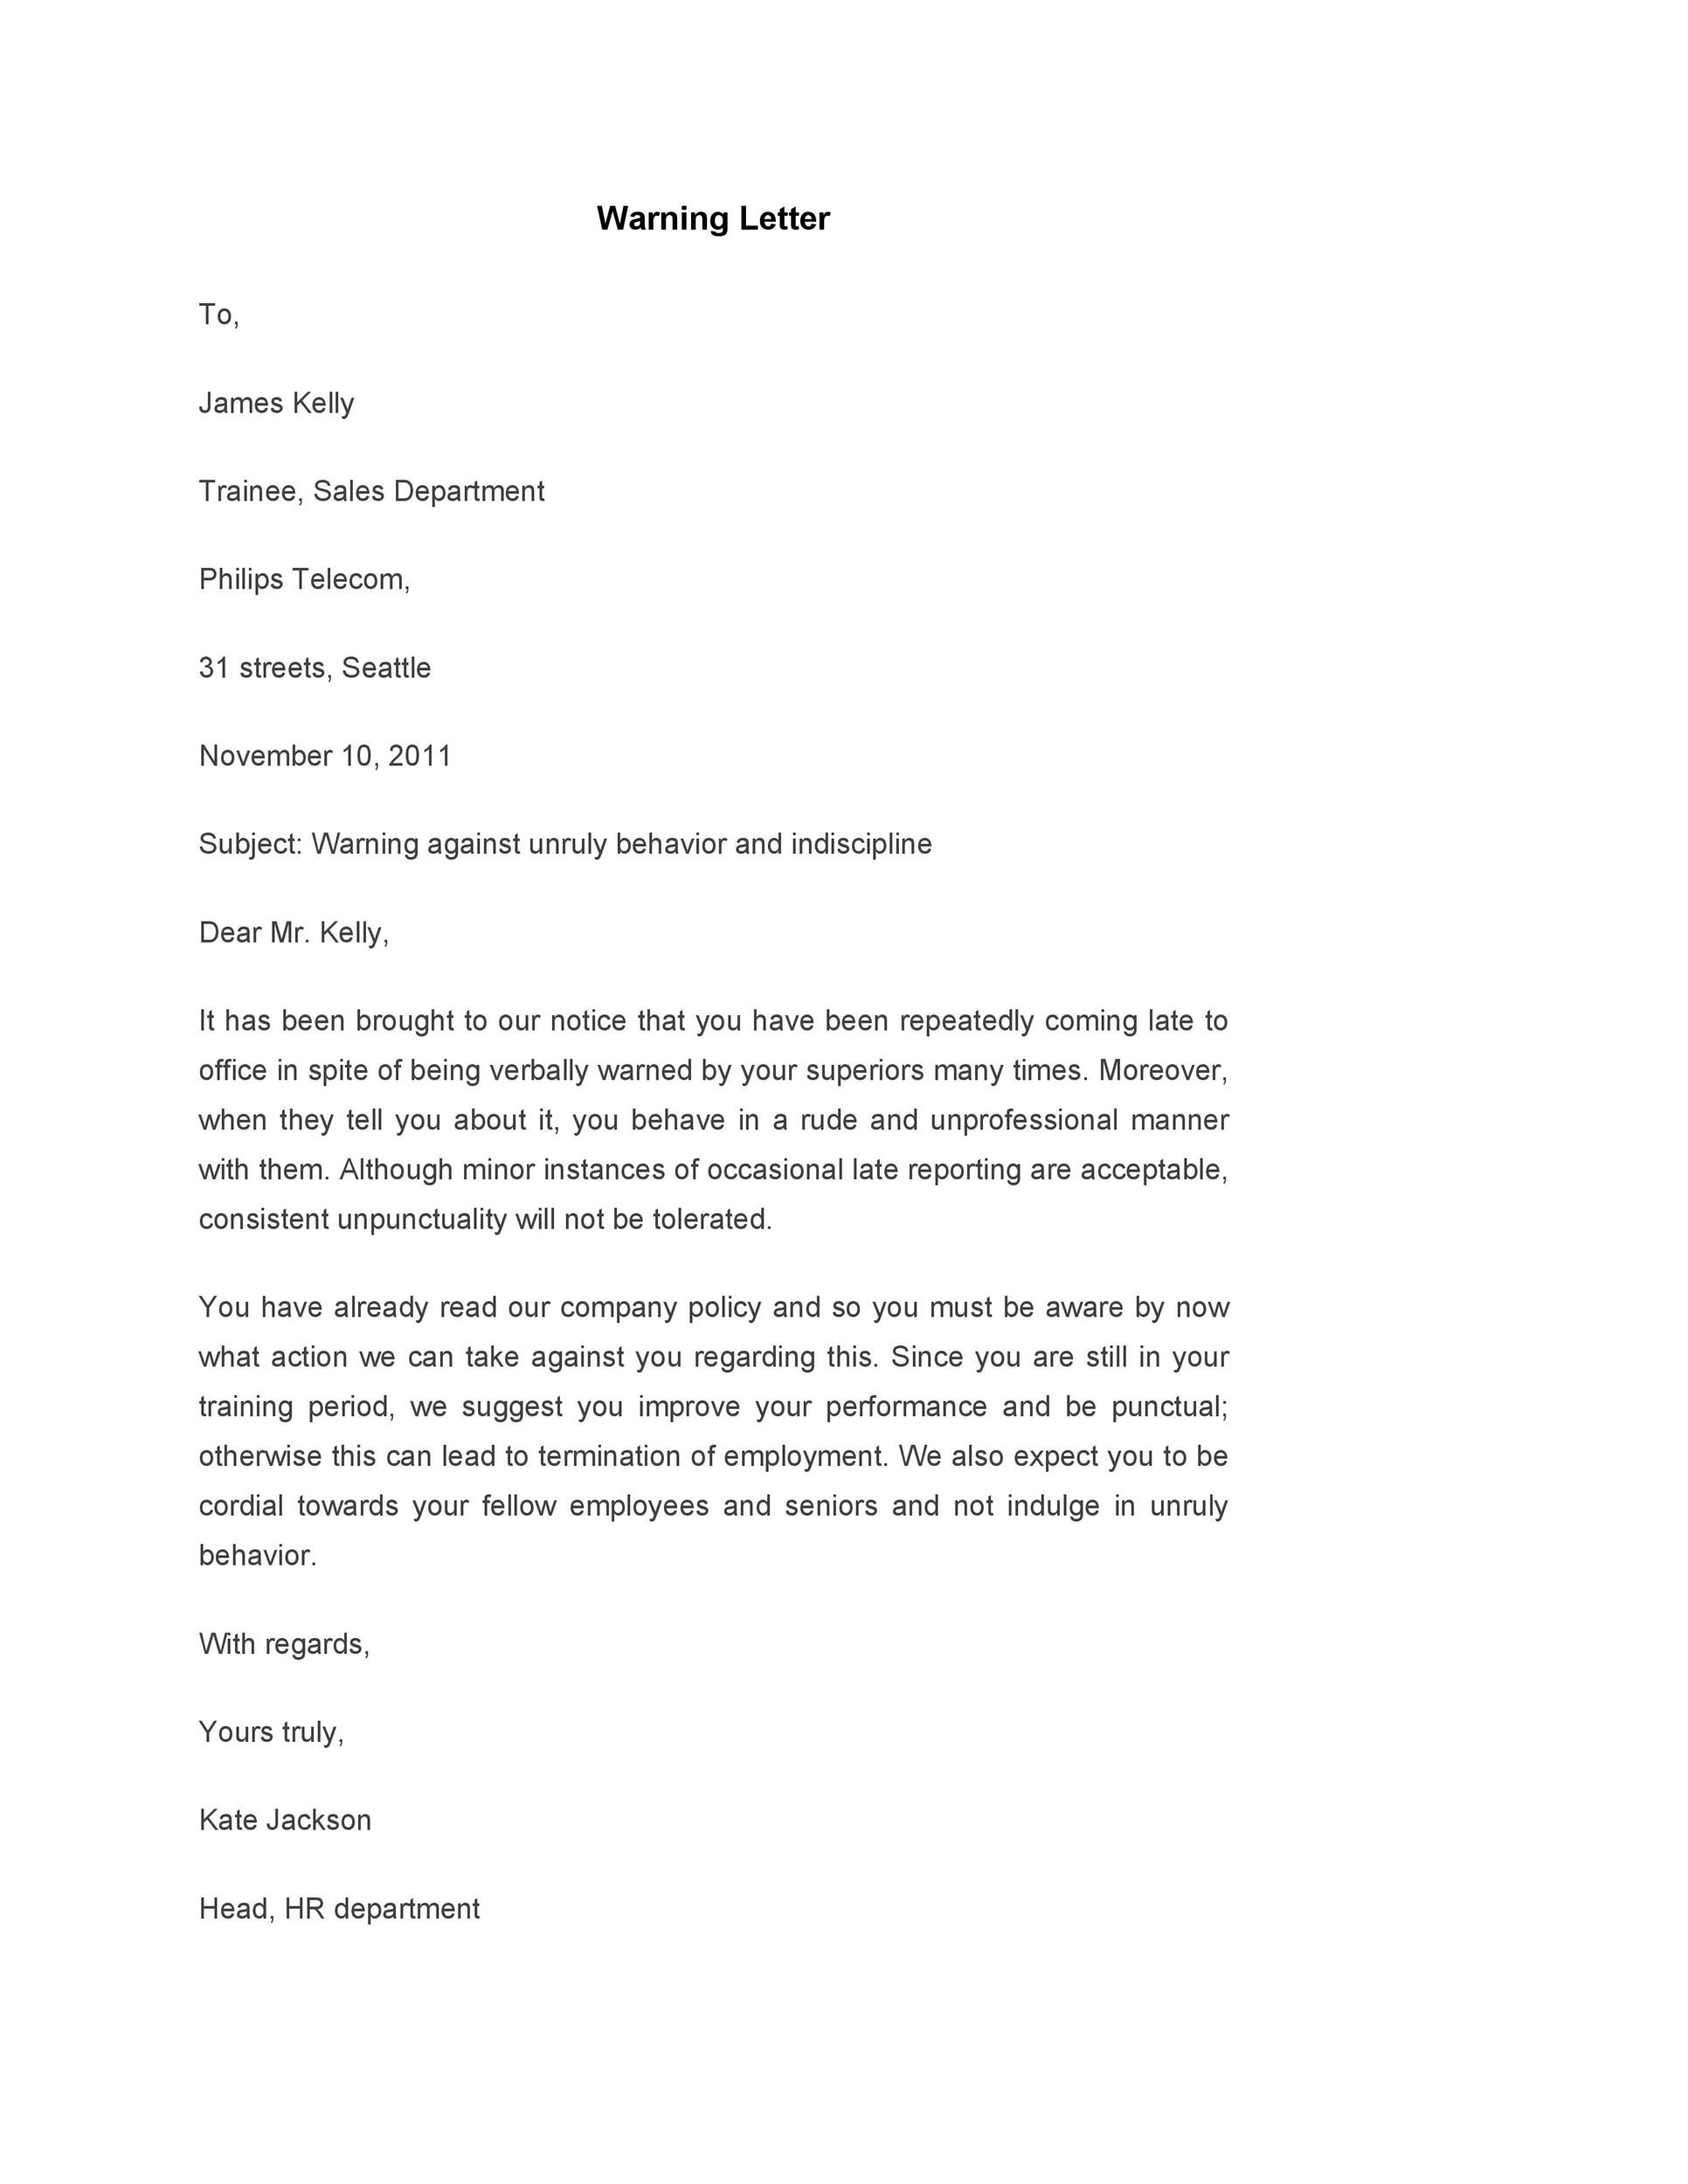 23 Professional Warning Letters (Free Templates) ᐅ TemplateLab